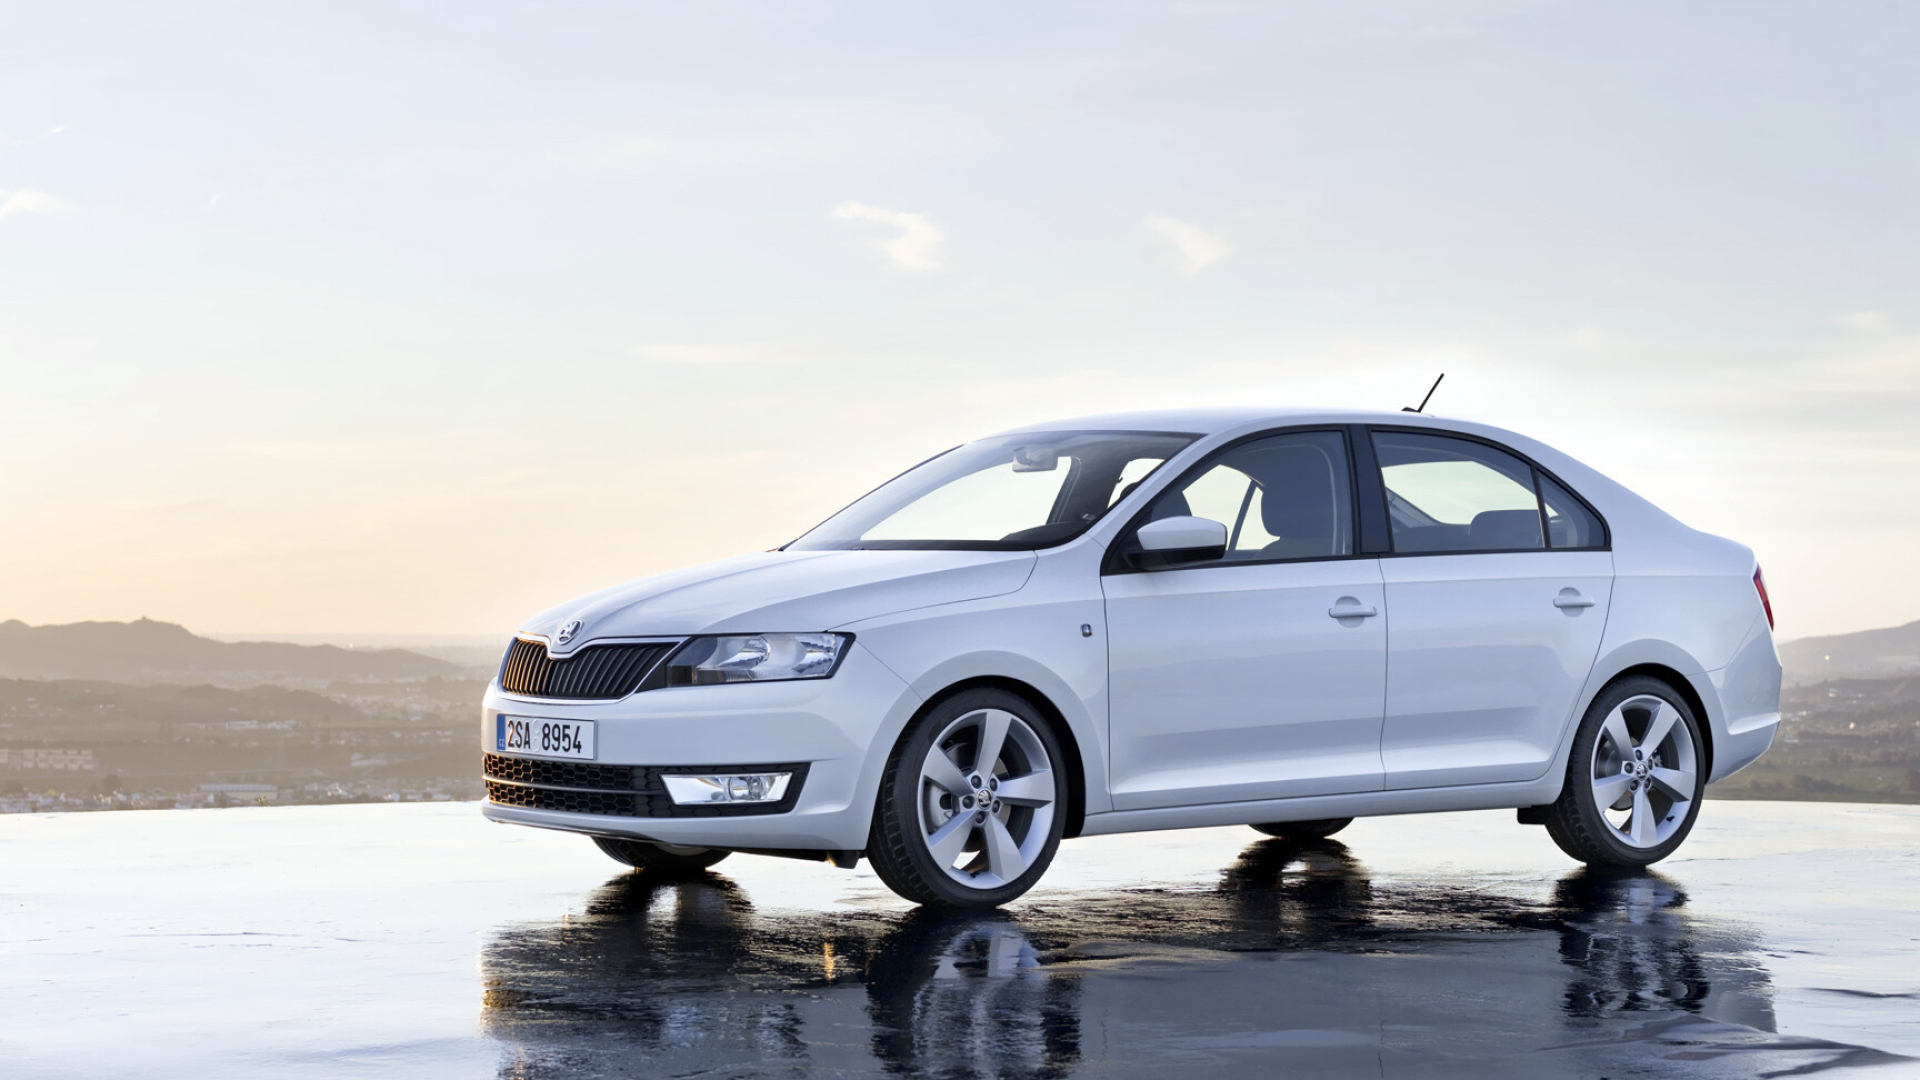 Skoda: Side view of a 2013 Rapid, Vehicle. 1920x1080 Full HD Background.